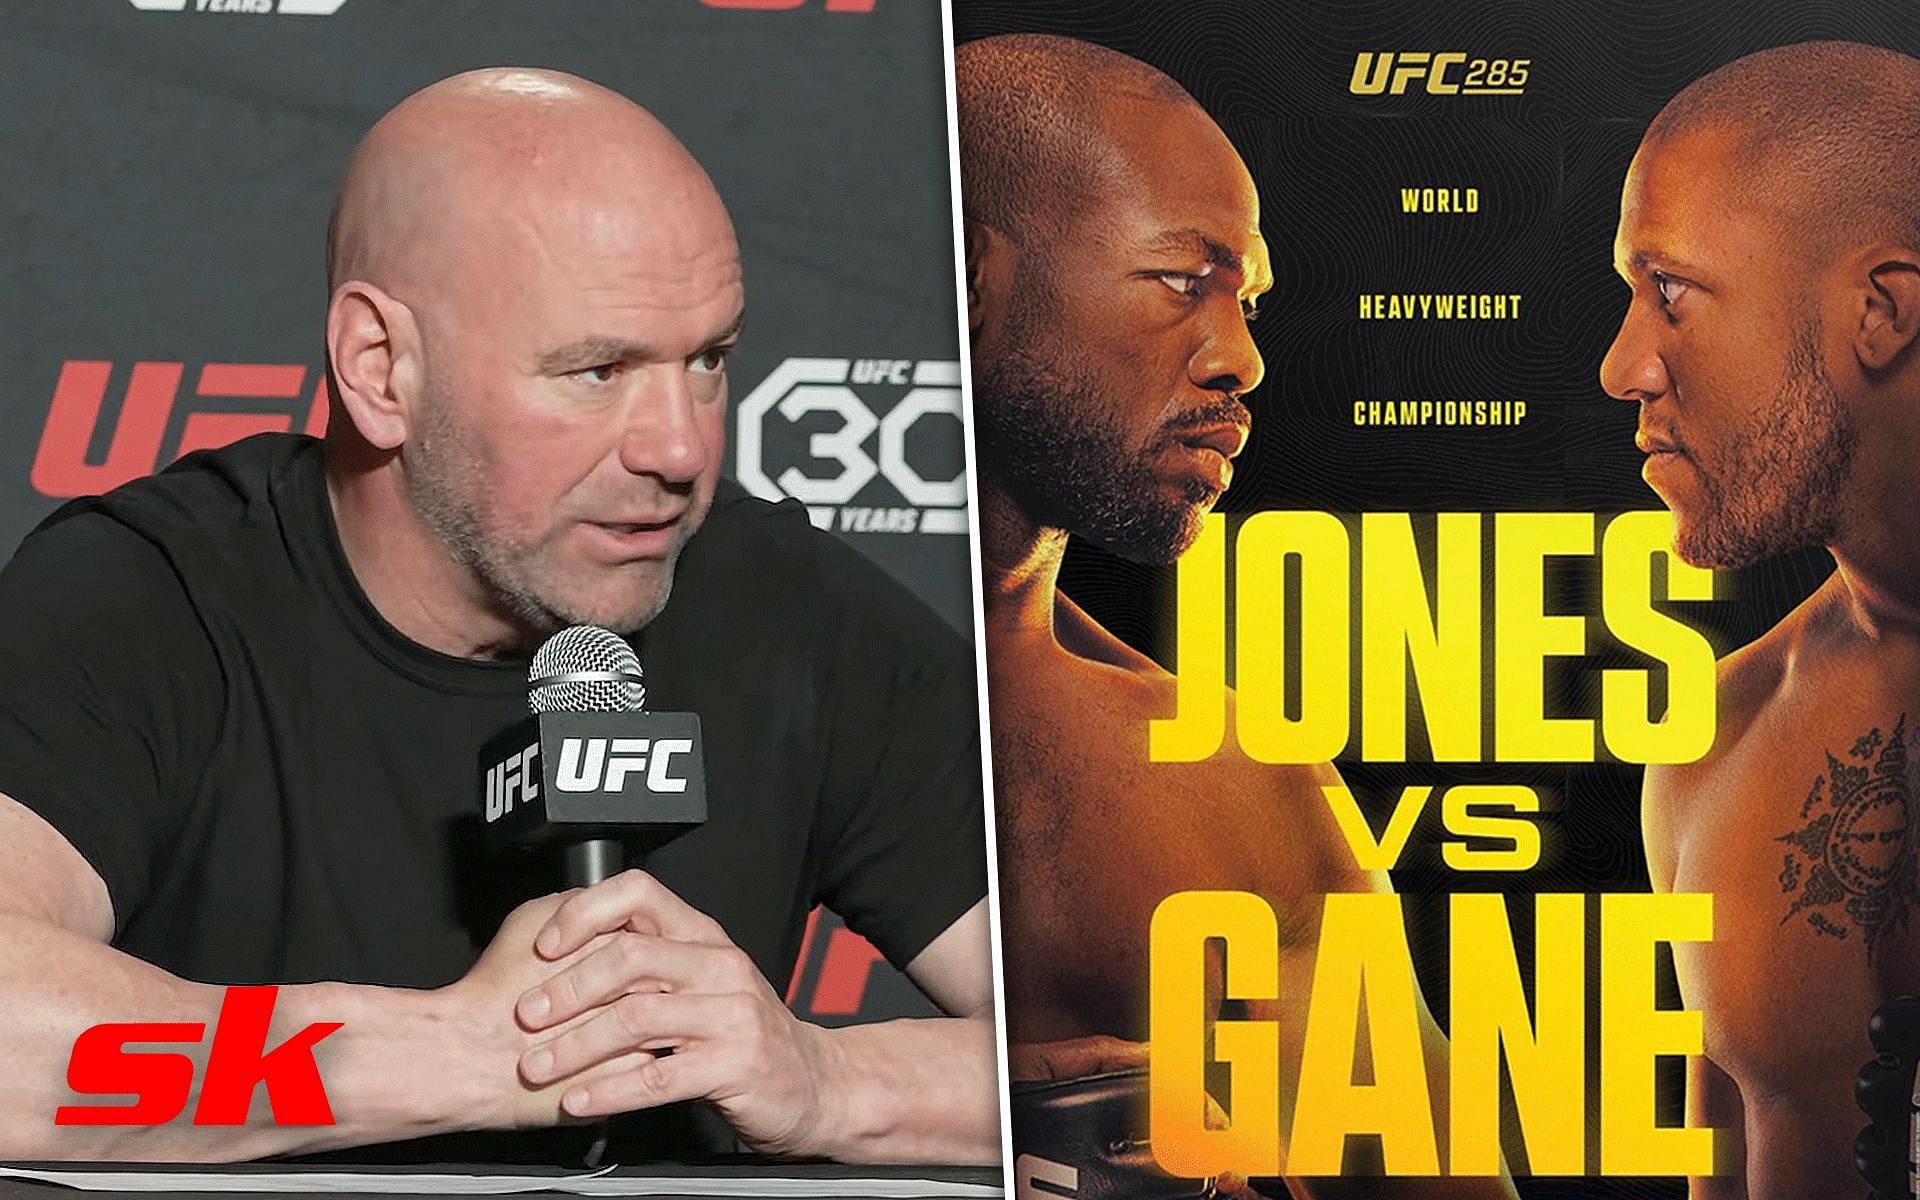 Dana White (left) and Jon Jones vs. Ciryl Gane poster (right). [Images courtesy: left image from YouTube MMA Junkie and right image from Instagram @ufc]